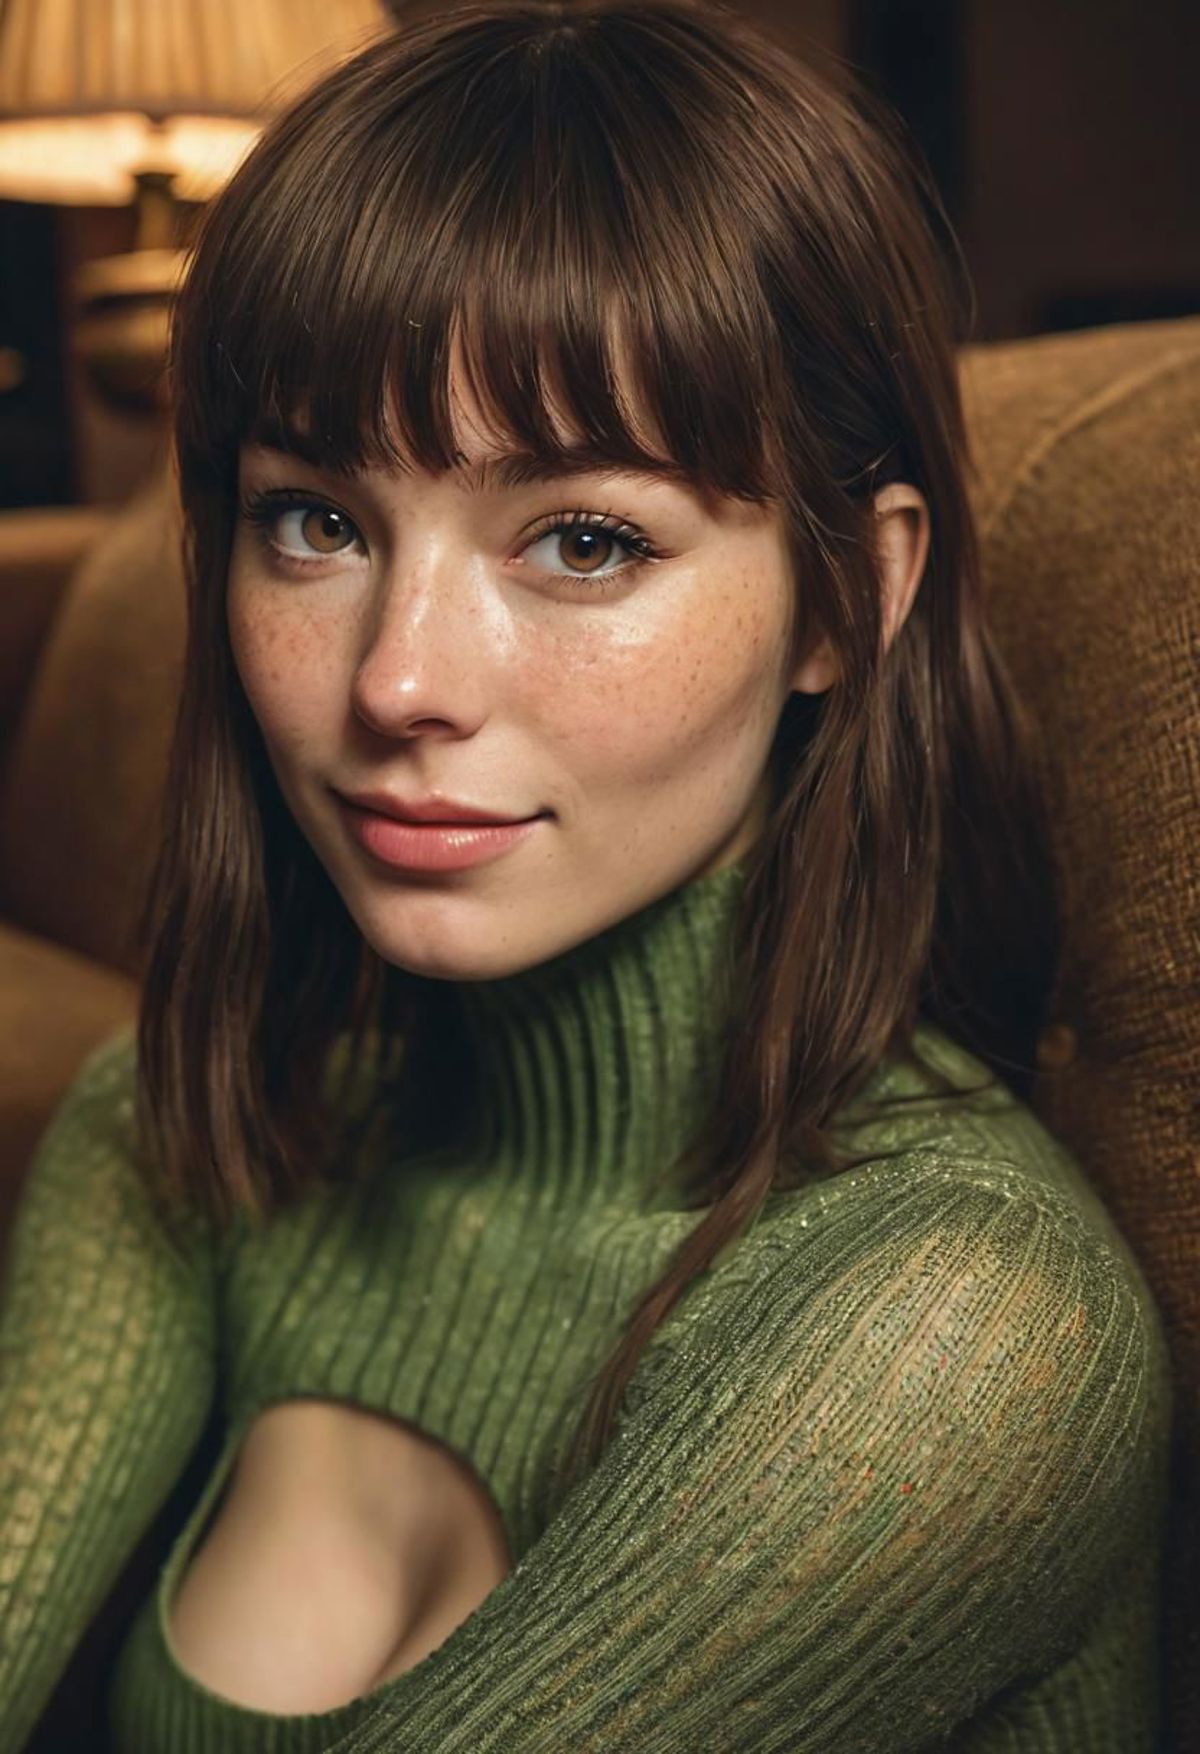 A woman with freckles and a green sweater looking at the camera.